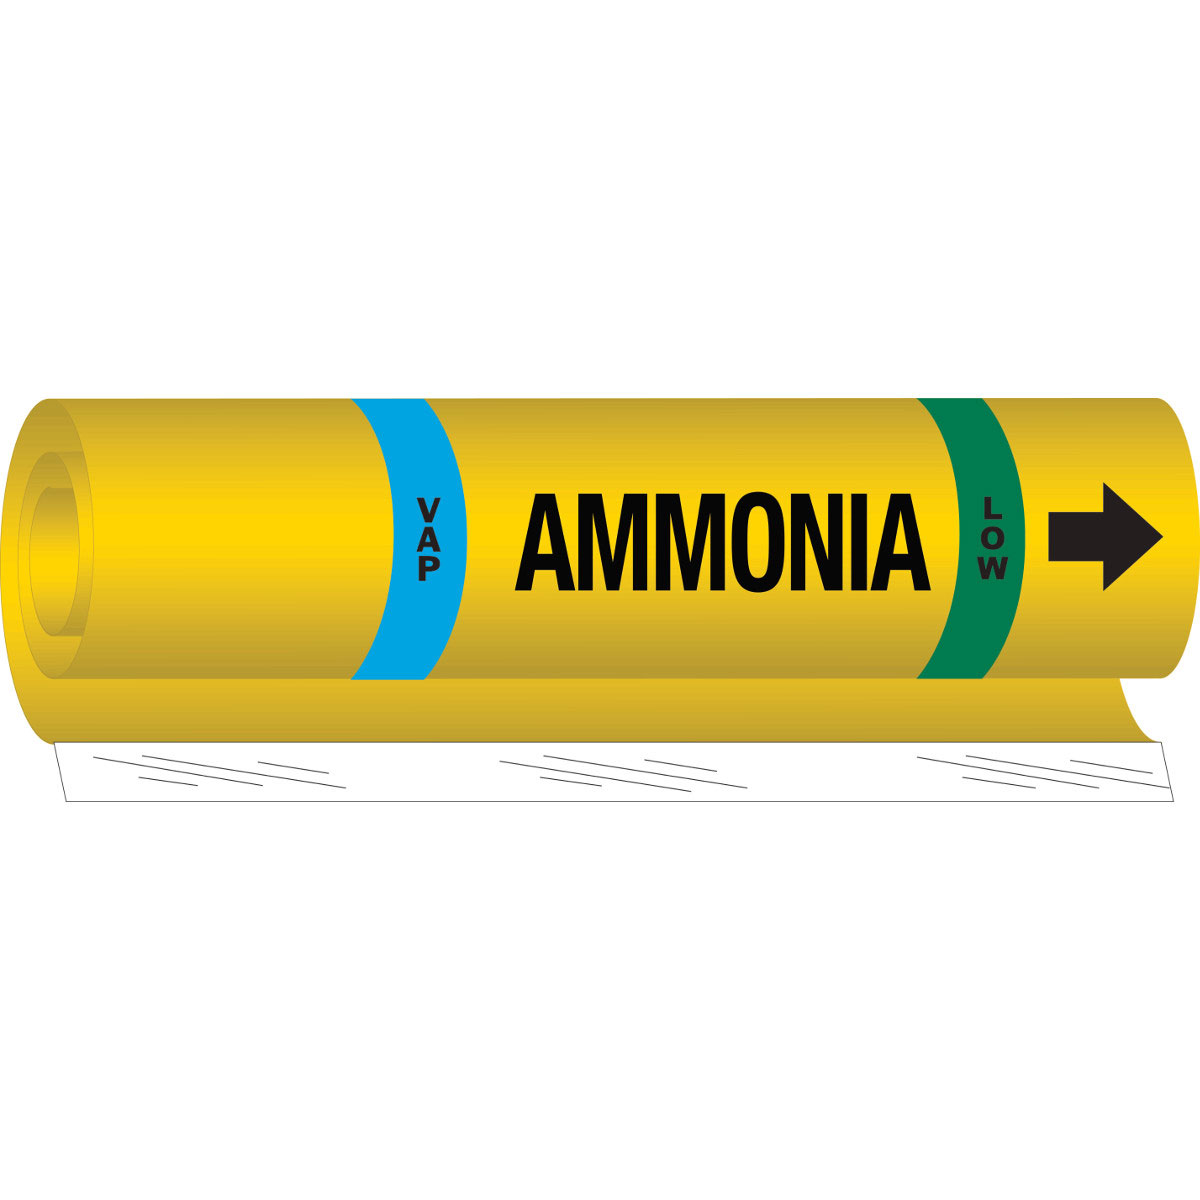 anhydrous ammonia piping standards